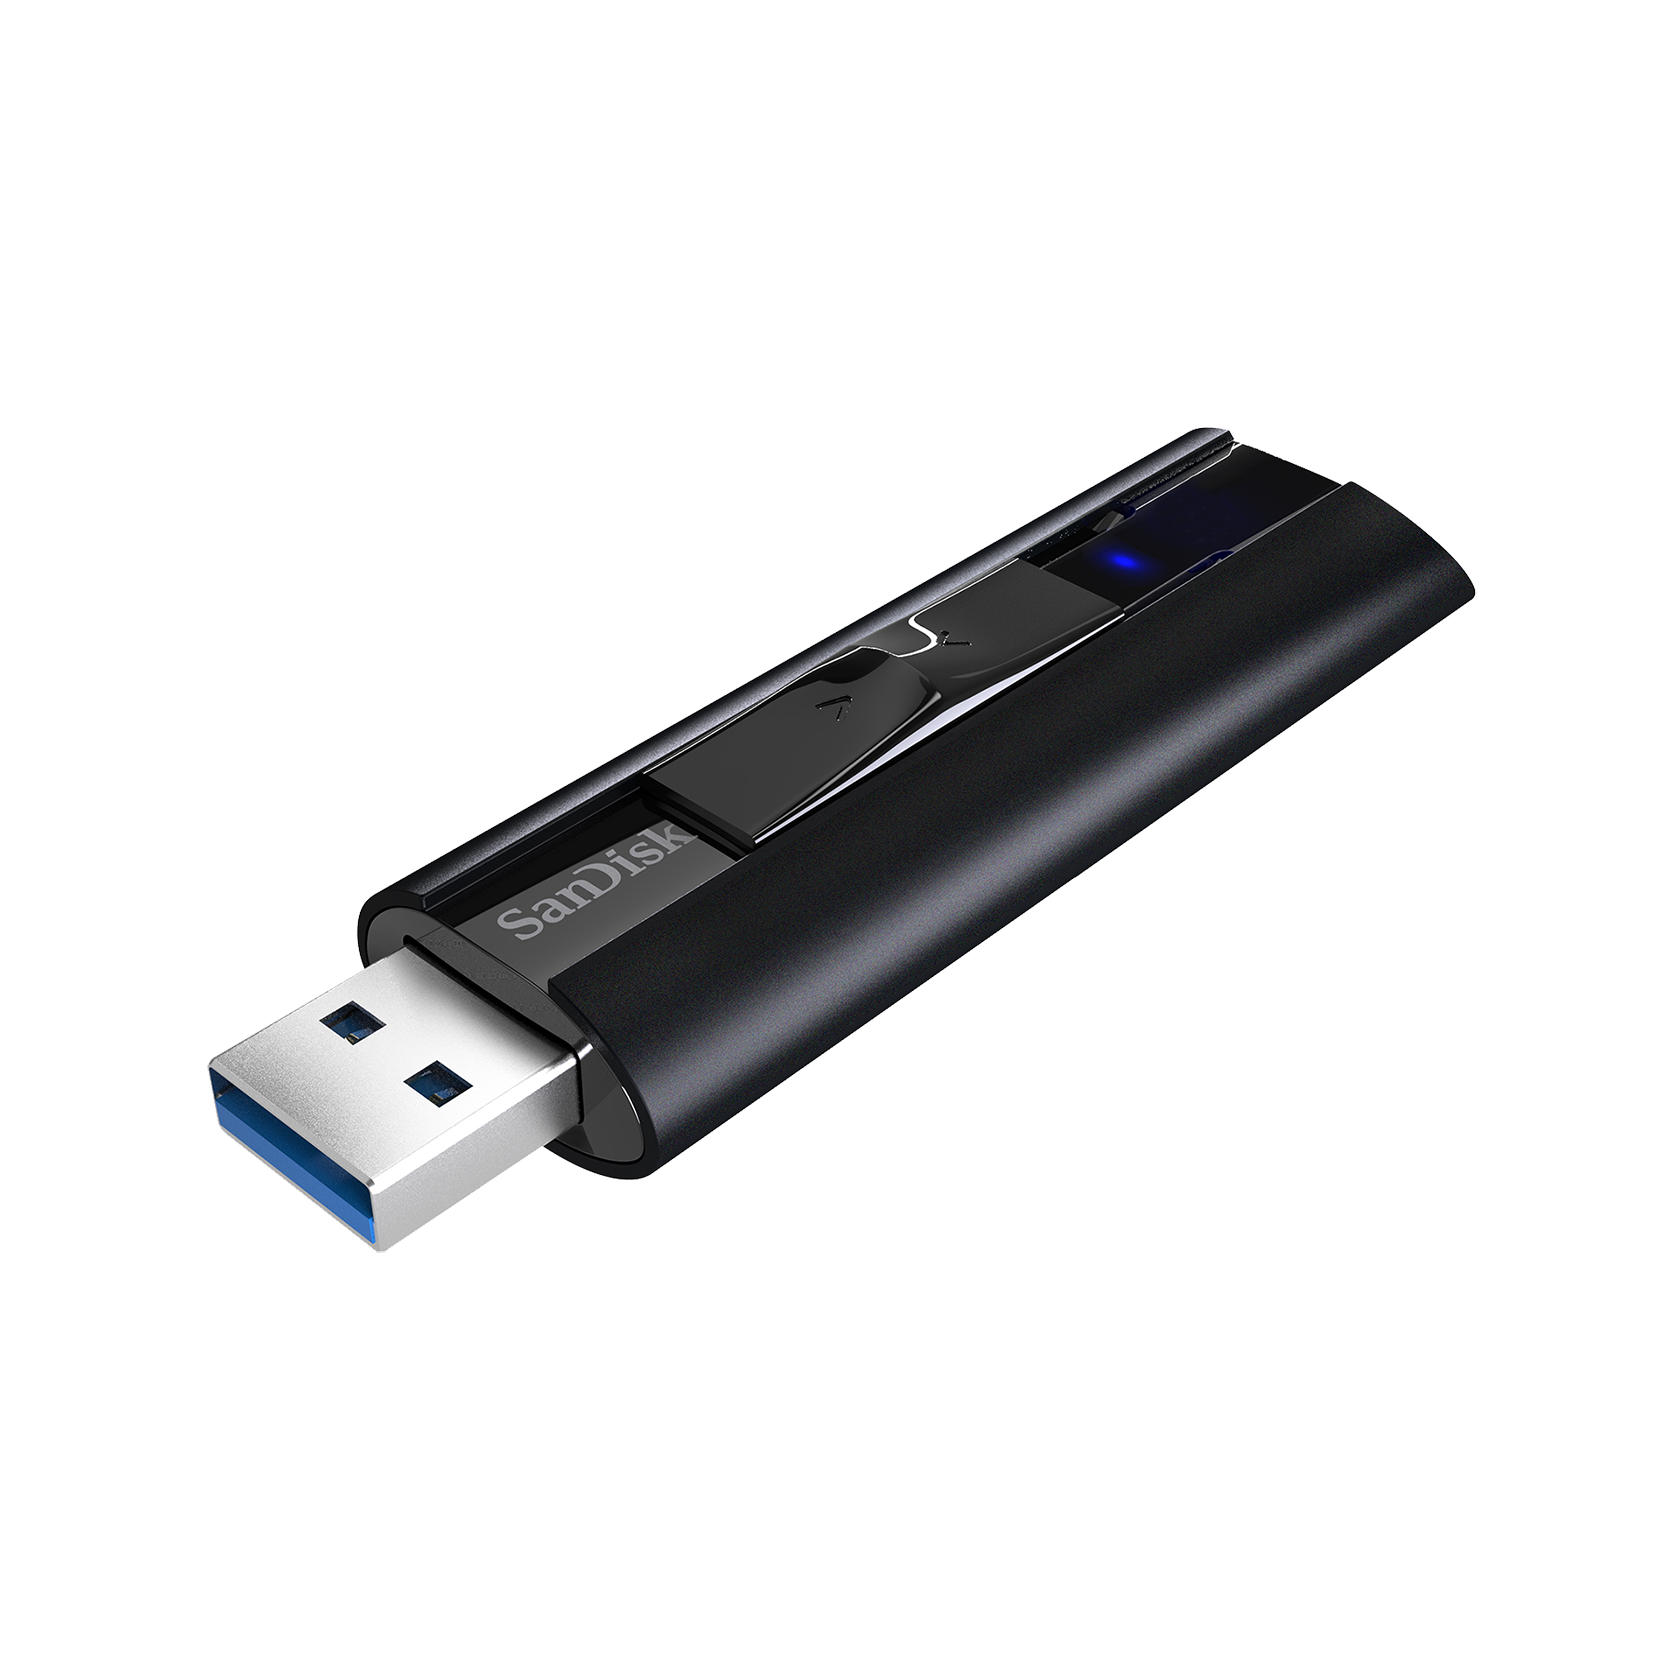 SanDisk 256GB Extreme PRO USB 3.2 Solid State Flash Drive - SDCZ880-256G-G46 - image 1 of 4